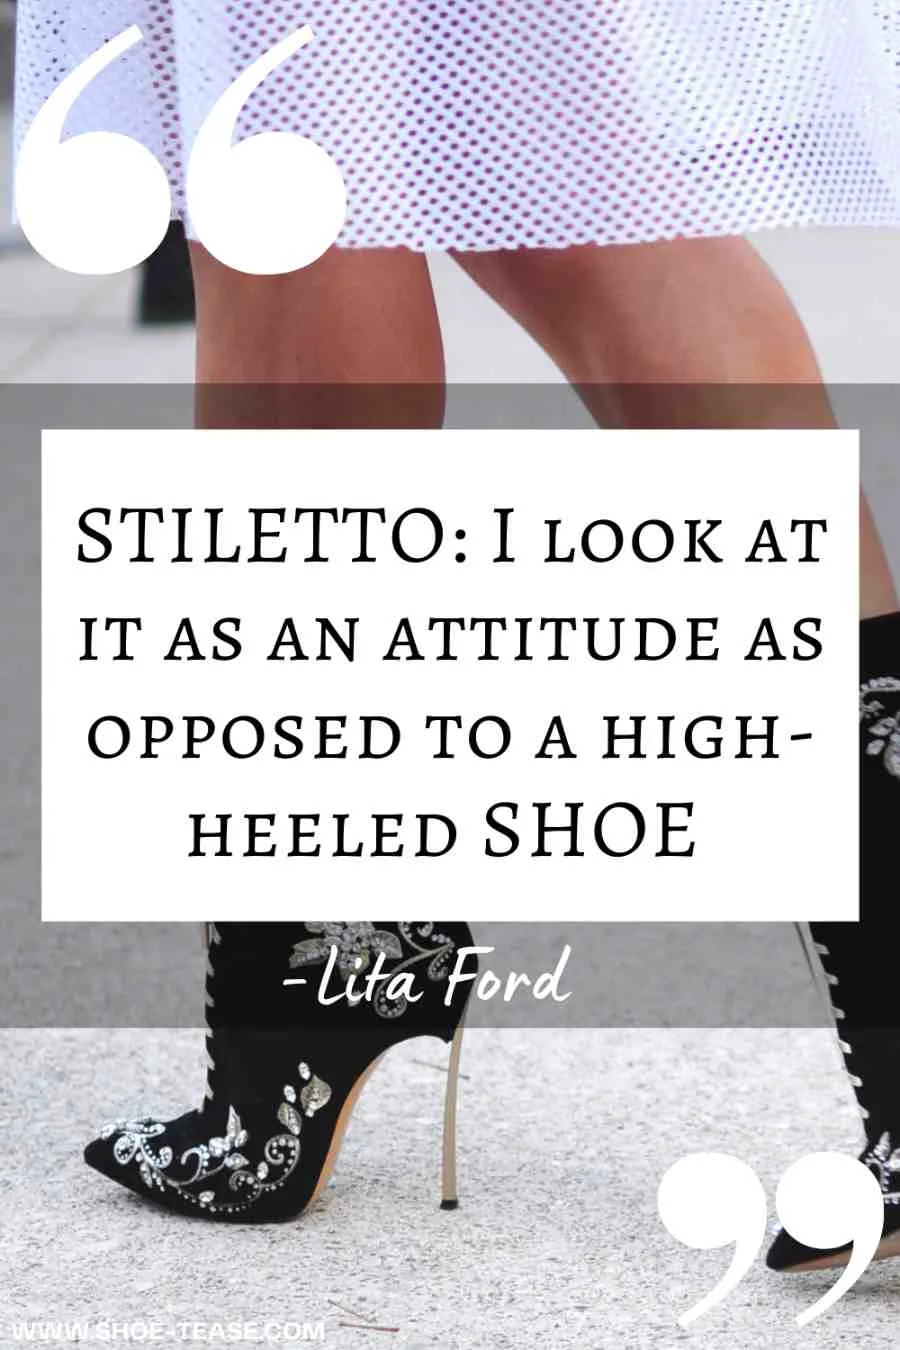 Stiletto Quote reading "I look at it as an attitude as opposed to a high heeled shoe - Lita Ford" over image of woman in black embroidered stiletto booties.